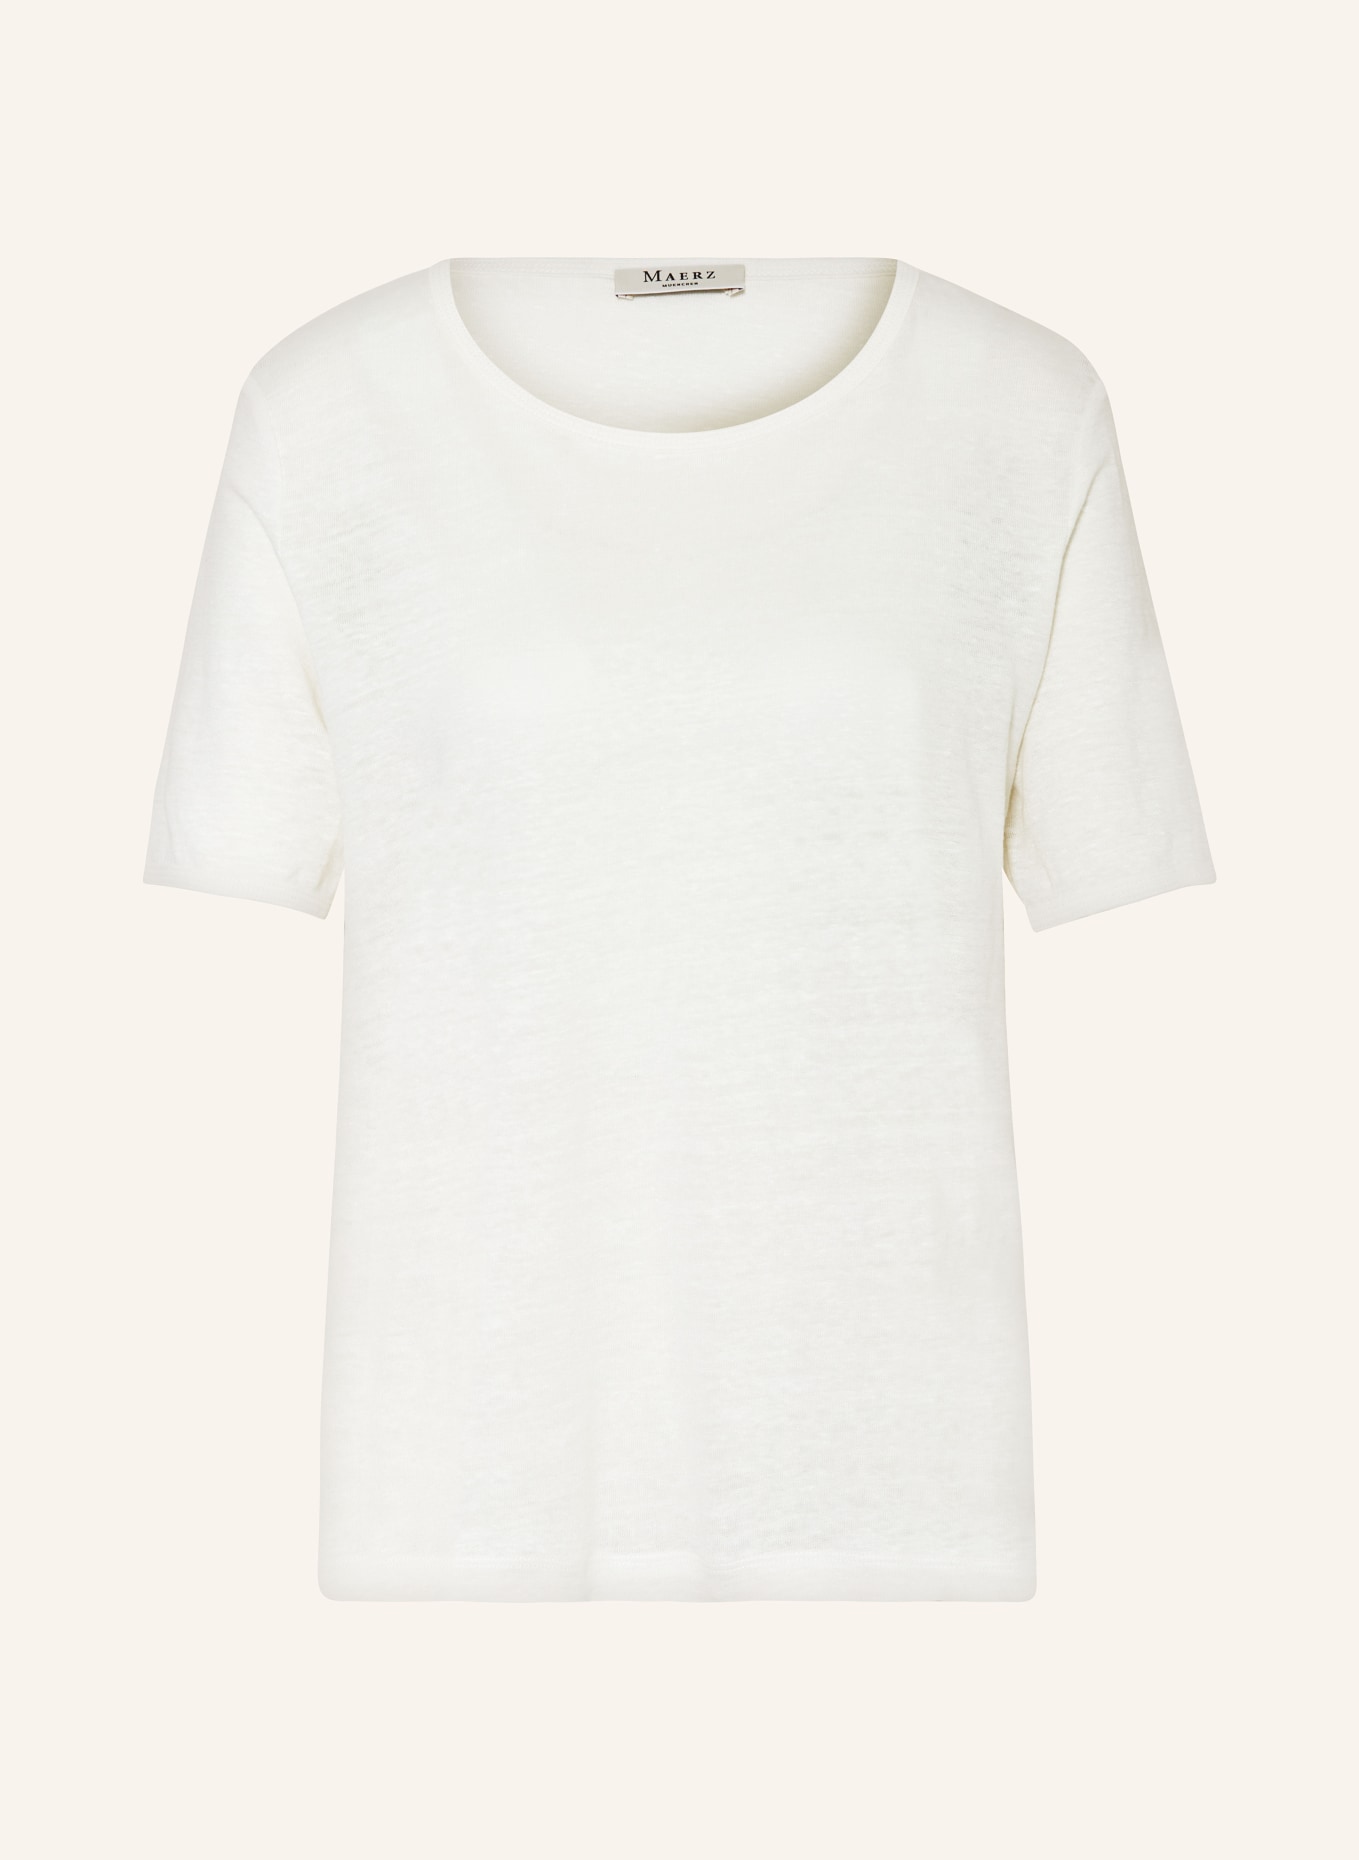 MAERZ MUENCHEN T-shirt made of linen, Color: WHITE (Image 1)